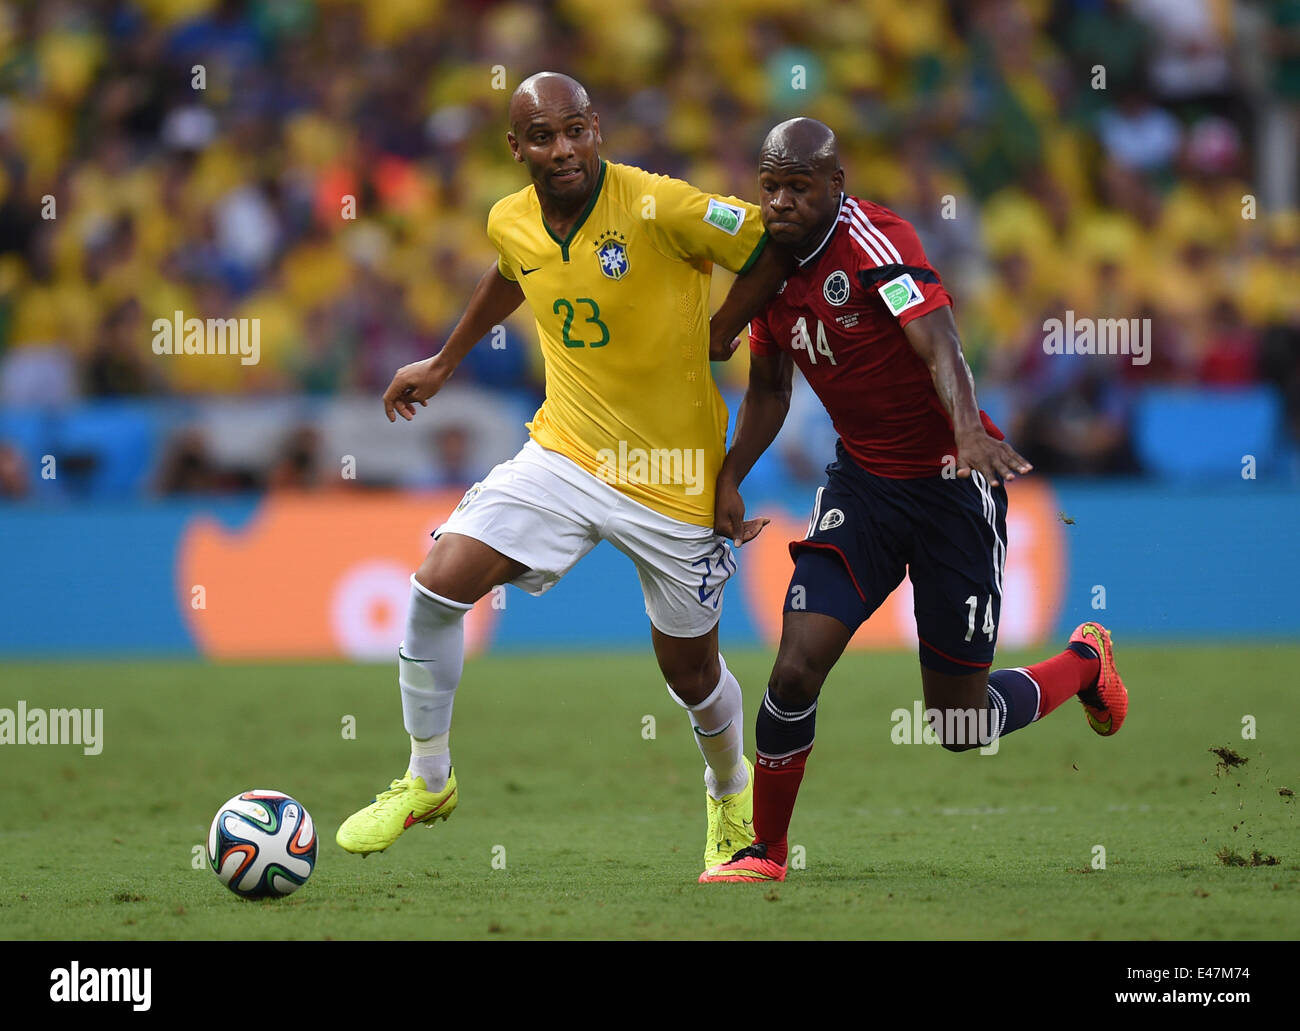 Fortaleza, Brazil. 04th July, 2014. Maicon (L) of Brazil and Victor Ibarbo of Colombia vie for the ball during the FIFA World Cup 2014 quarter final match soccer between Brazil and Colombia at the Estadio Castelao in Fortaleza, Brazil, 04 July 2014. Photo: Marius Becker/dpa/Alamy Live News Stock Photo